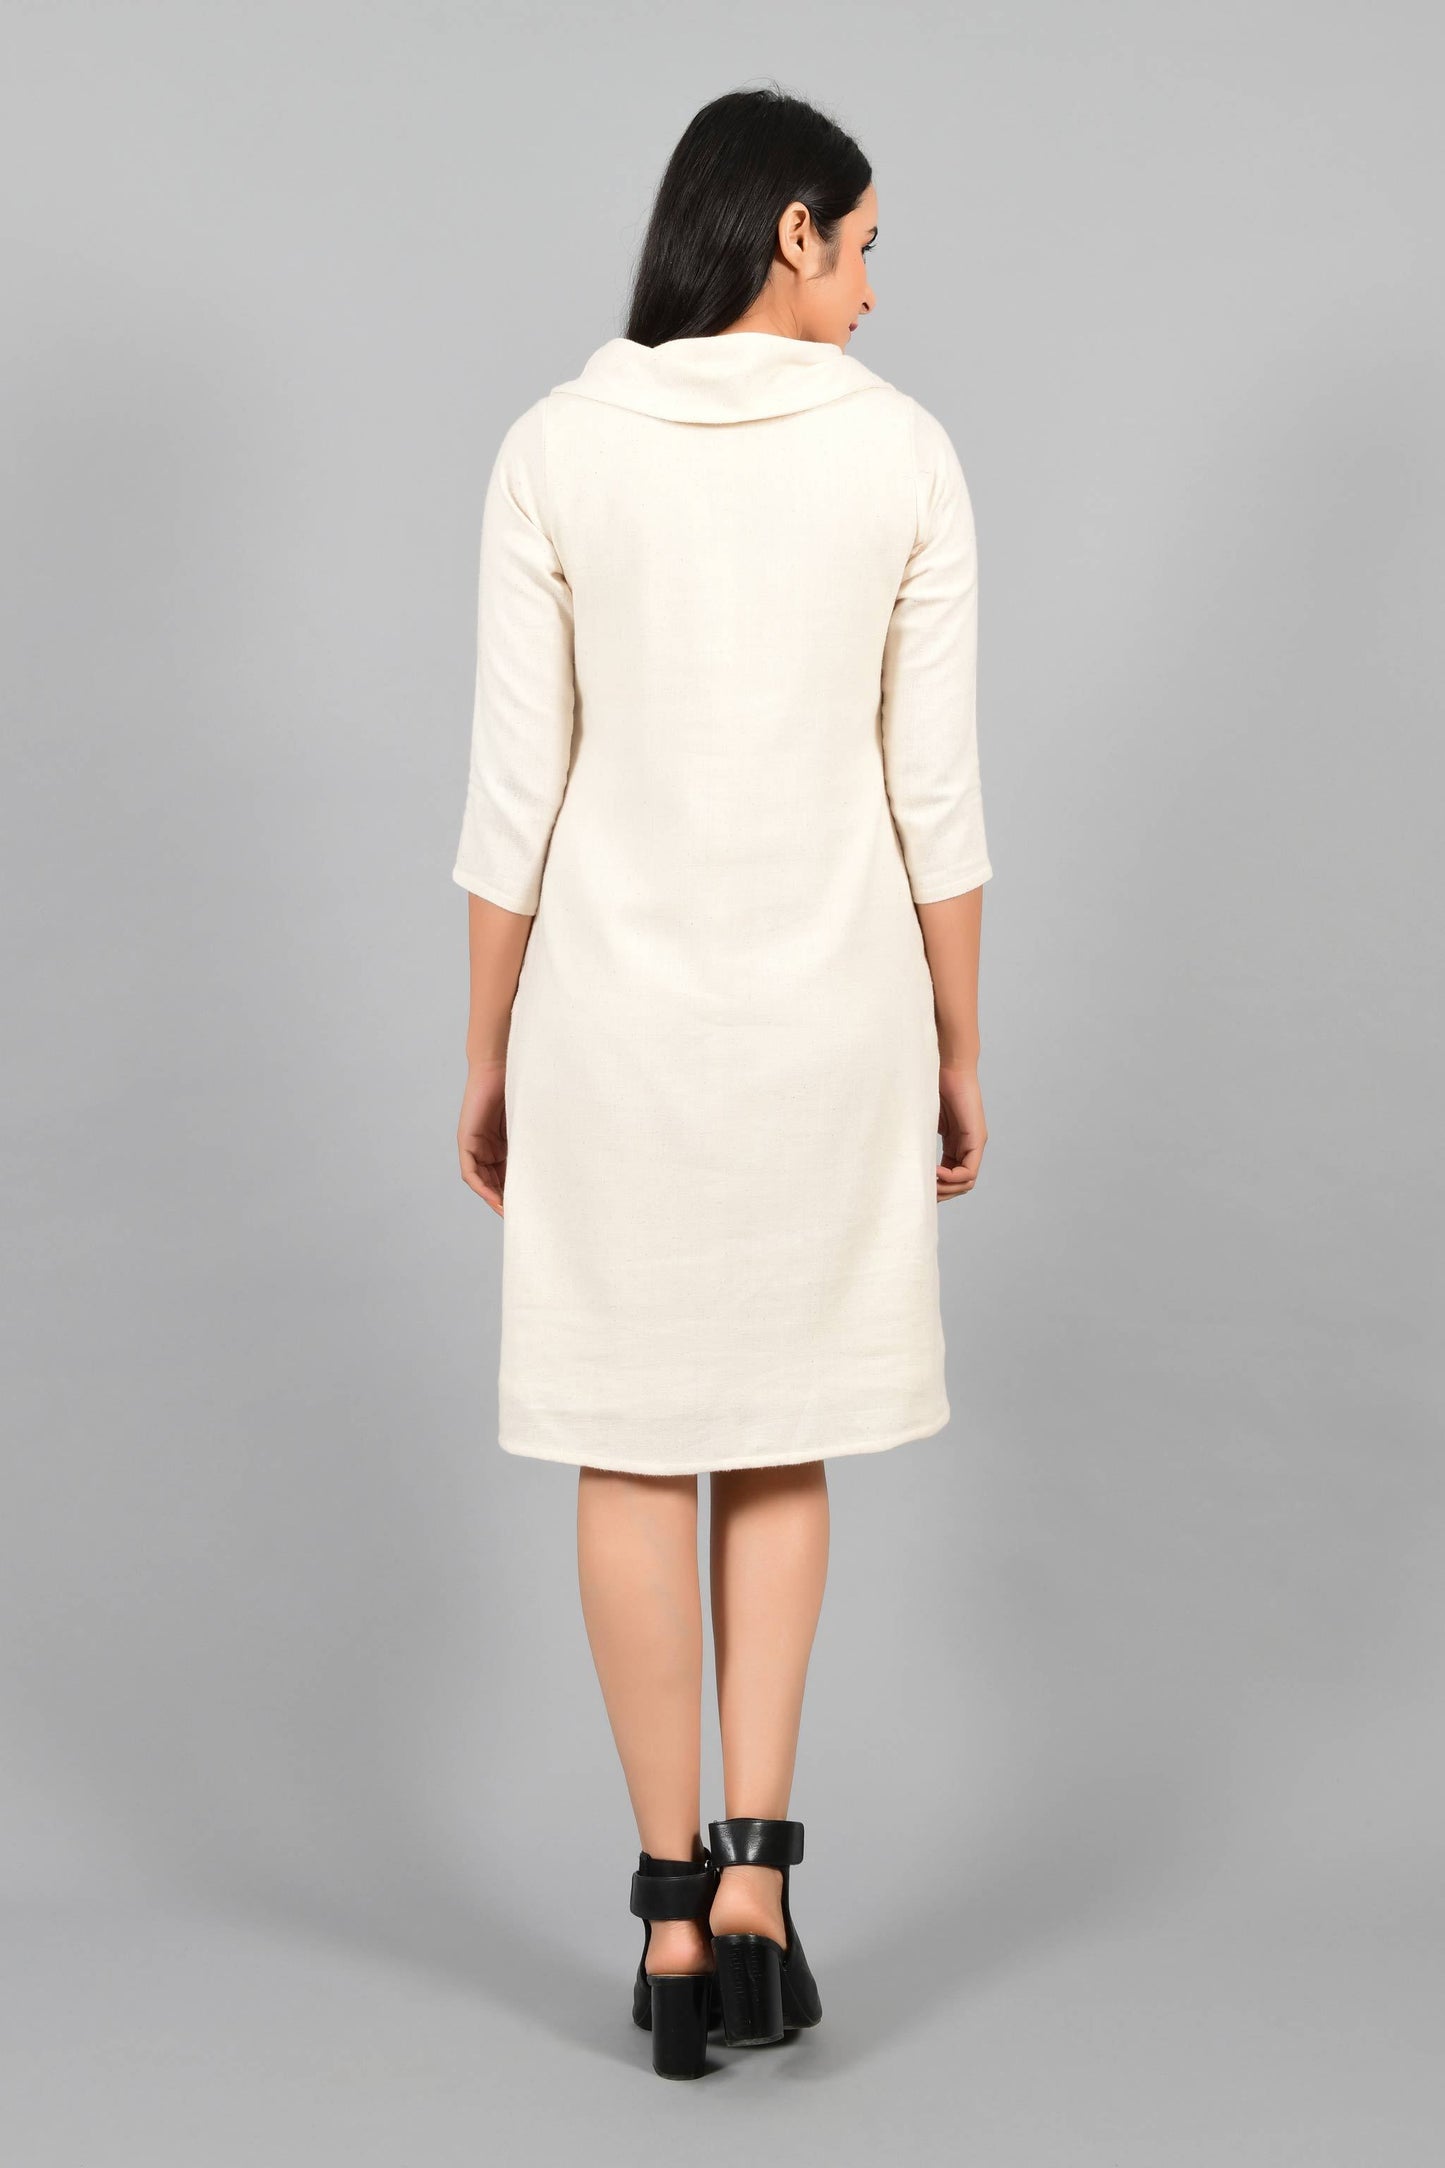 Back pose of an Indian female womenswear fashion model in an off-white Cashmere Cotton Cowl Neck Dress made using handspun and handwoven khadi cotton by Cotton Rack.